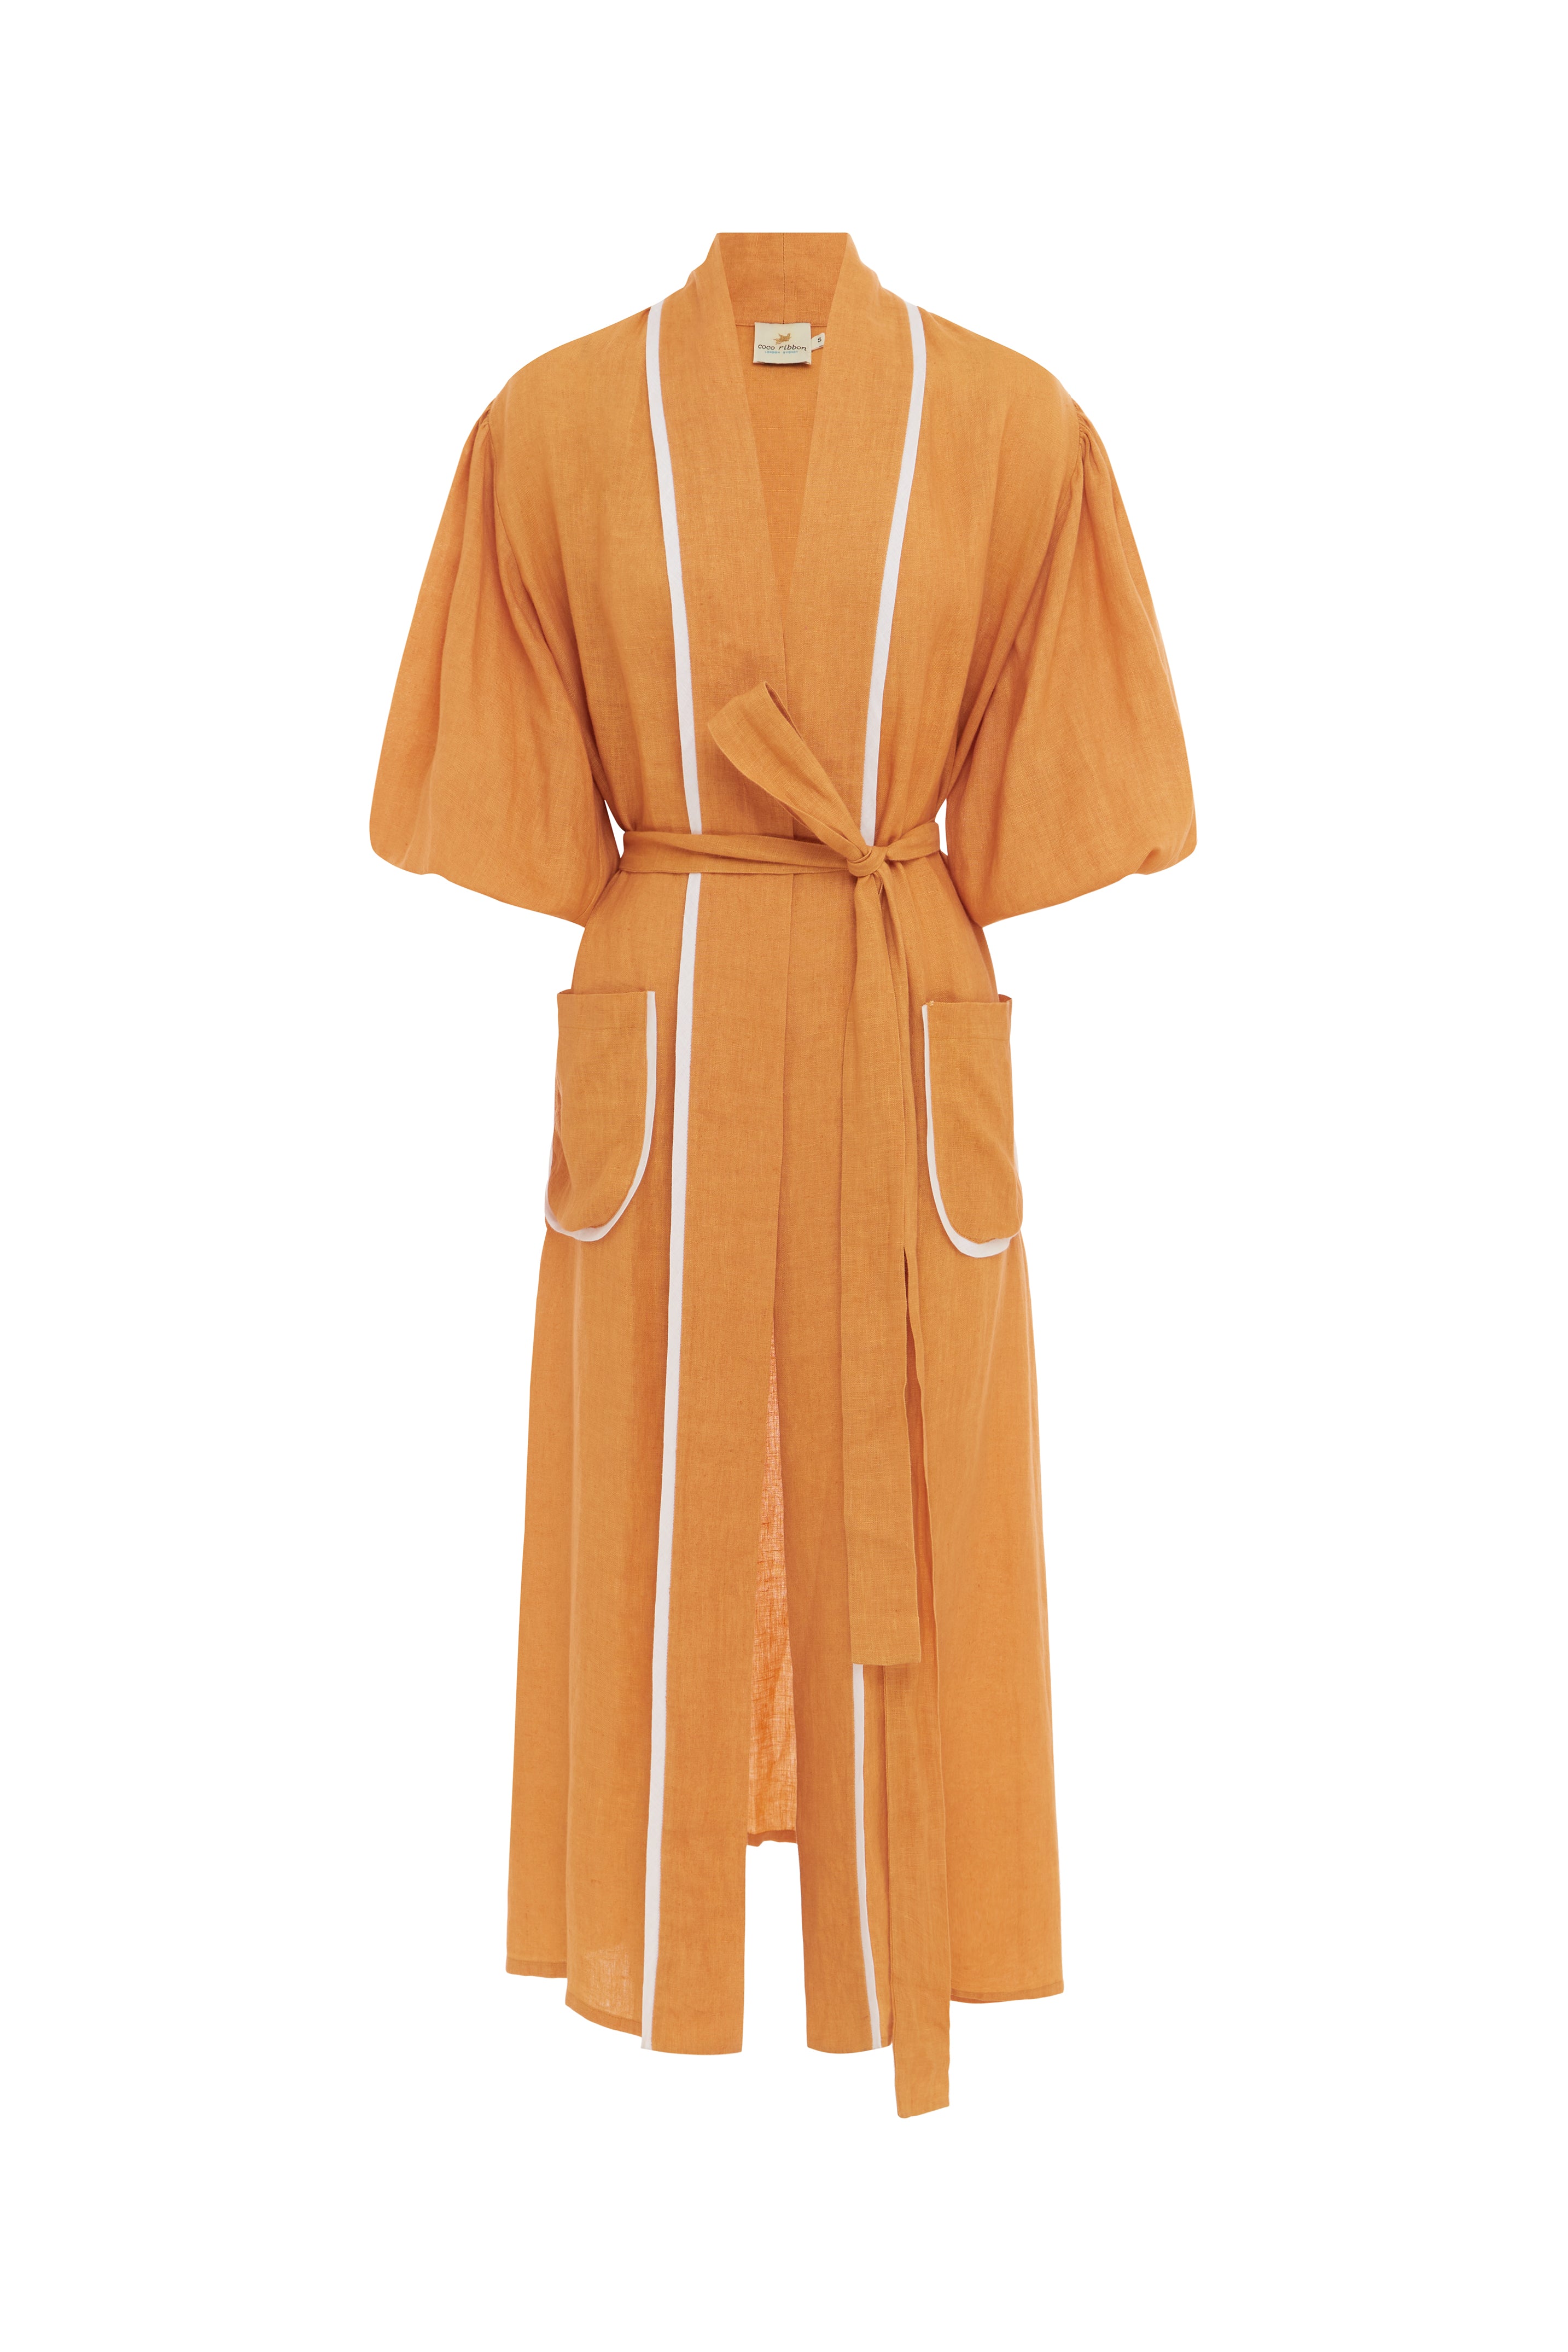 Cape Amarin Long Beach-to-Bar Robe | Solid Toffee